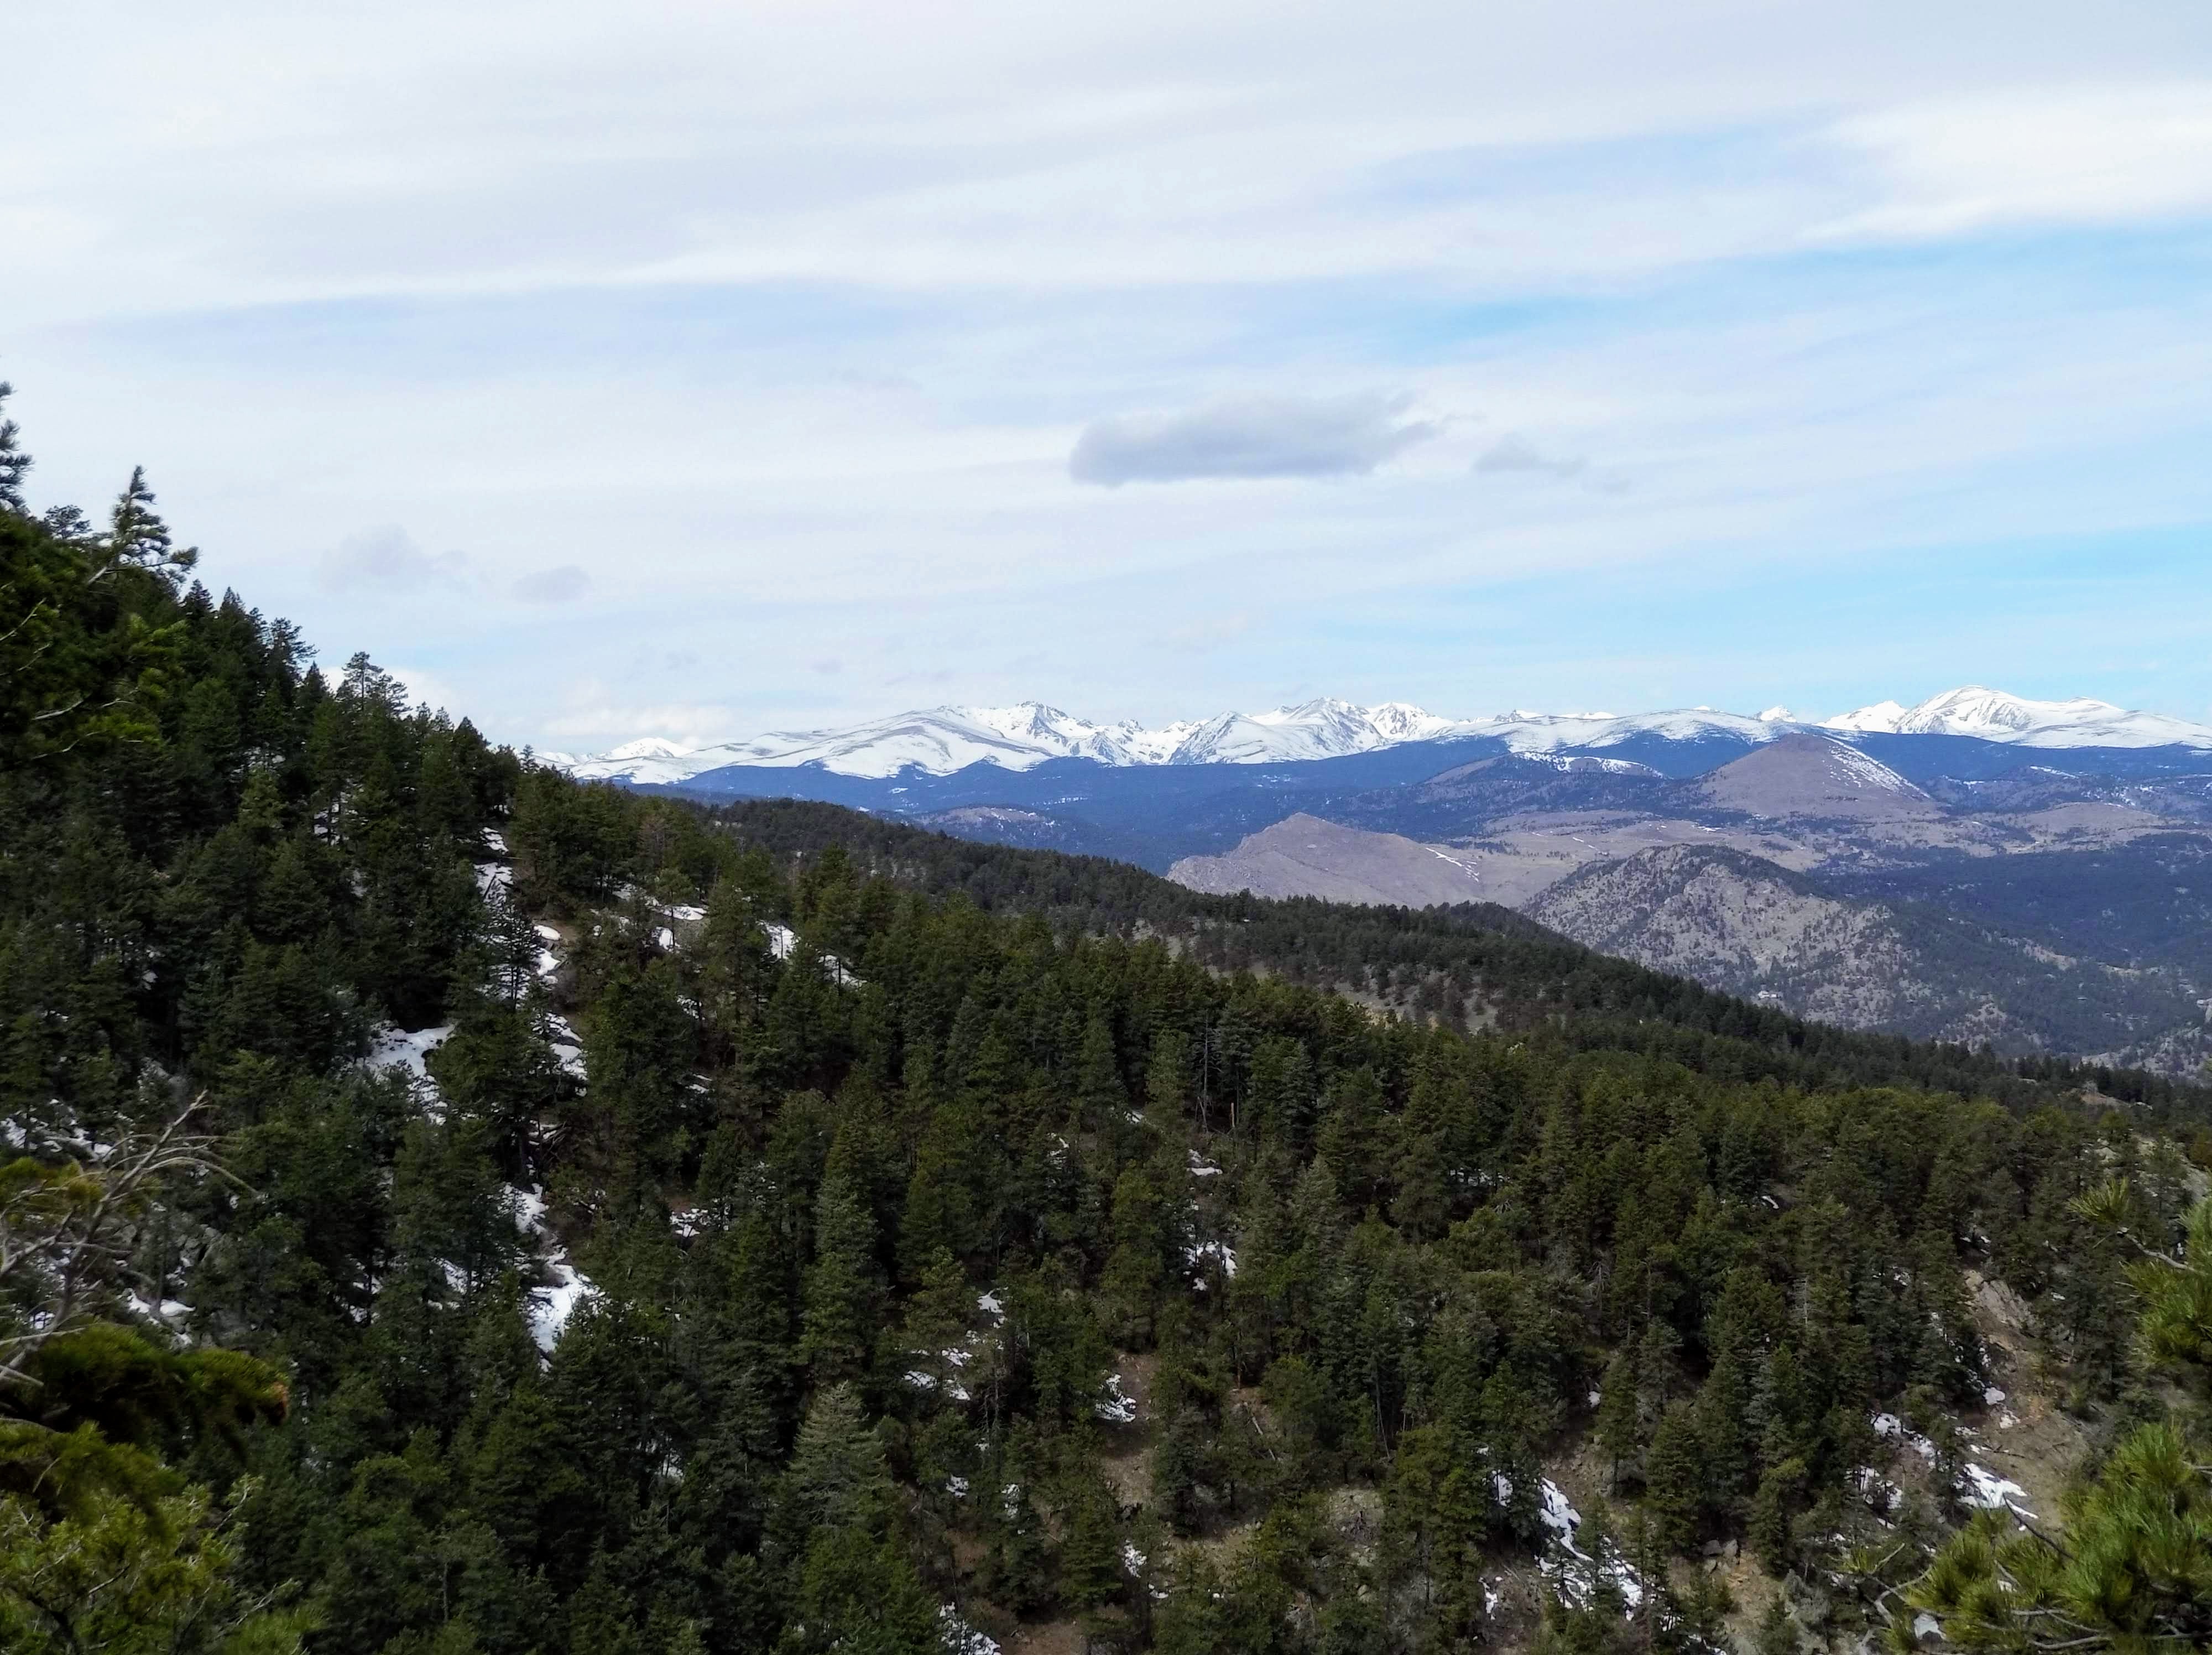 Looking back on the Continental Divide from the Flatirons